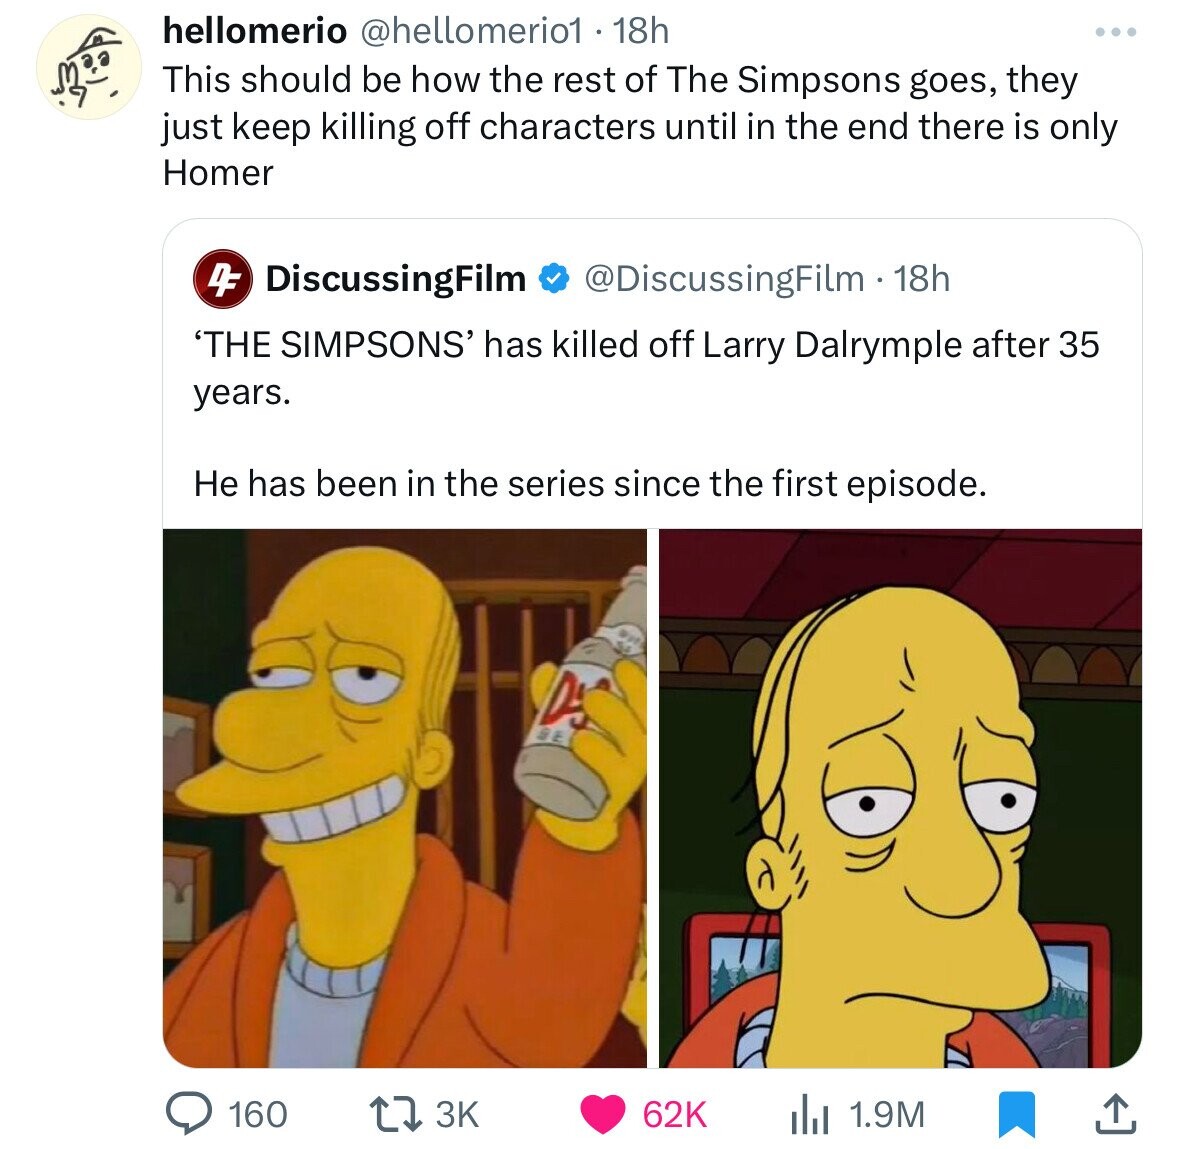 hellomerio @hellomerio1 . 18h This should be how the rest of The Simpsons goes, they just keep killing off characters until in the end there is only Homer 4F DiscussingFilm @DiscussingFilm 18h 'THE SIMPSONS' has killed off Larry Dalrymple after 35 years. Не has been in the series since the first episode. D 160 3K 62K 1.9M 